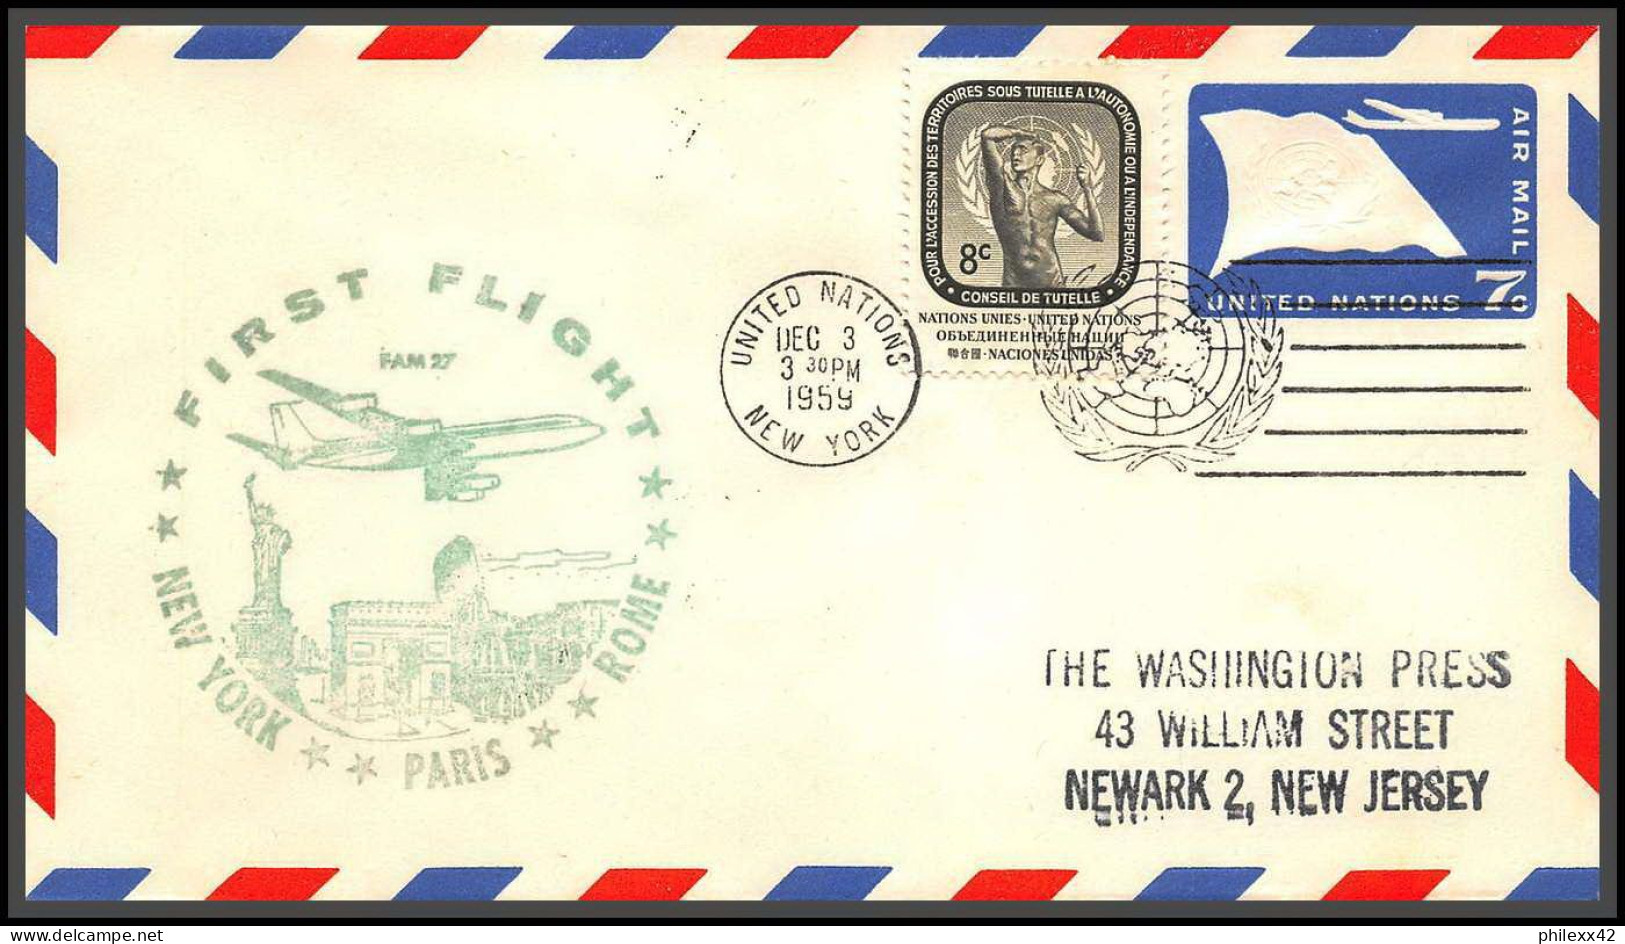 12626 Fam 27 New York Paris Rome 3/12/1959 Premier Vol First Flight Airmail Entier Stationery New York United Nations - Airplanes